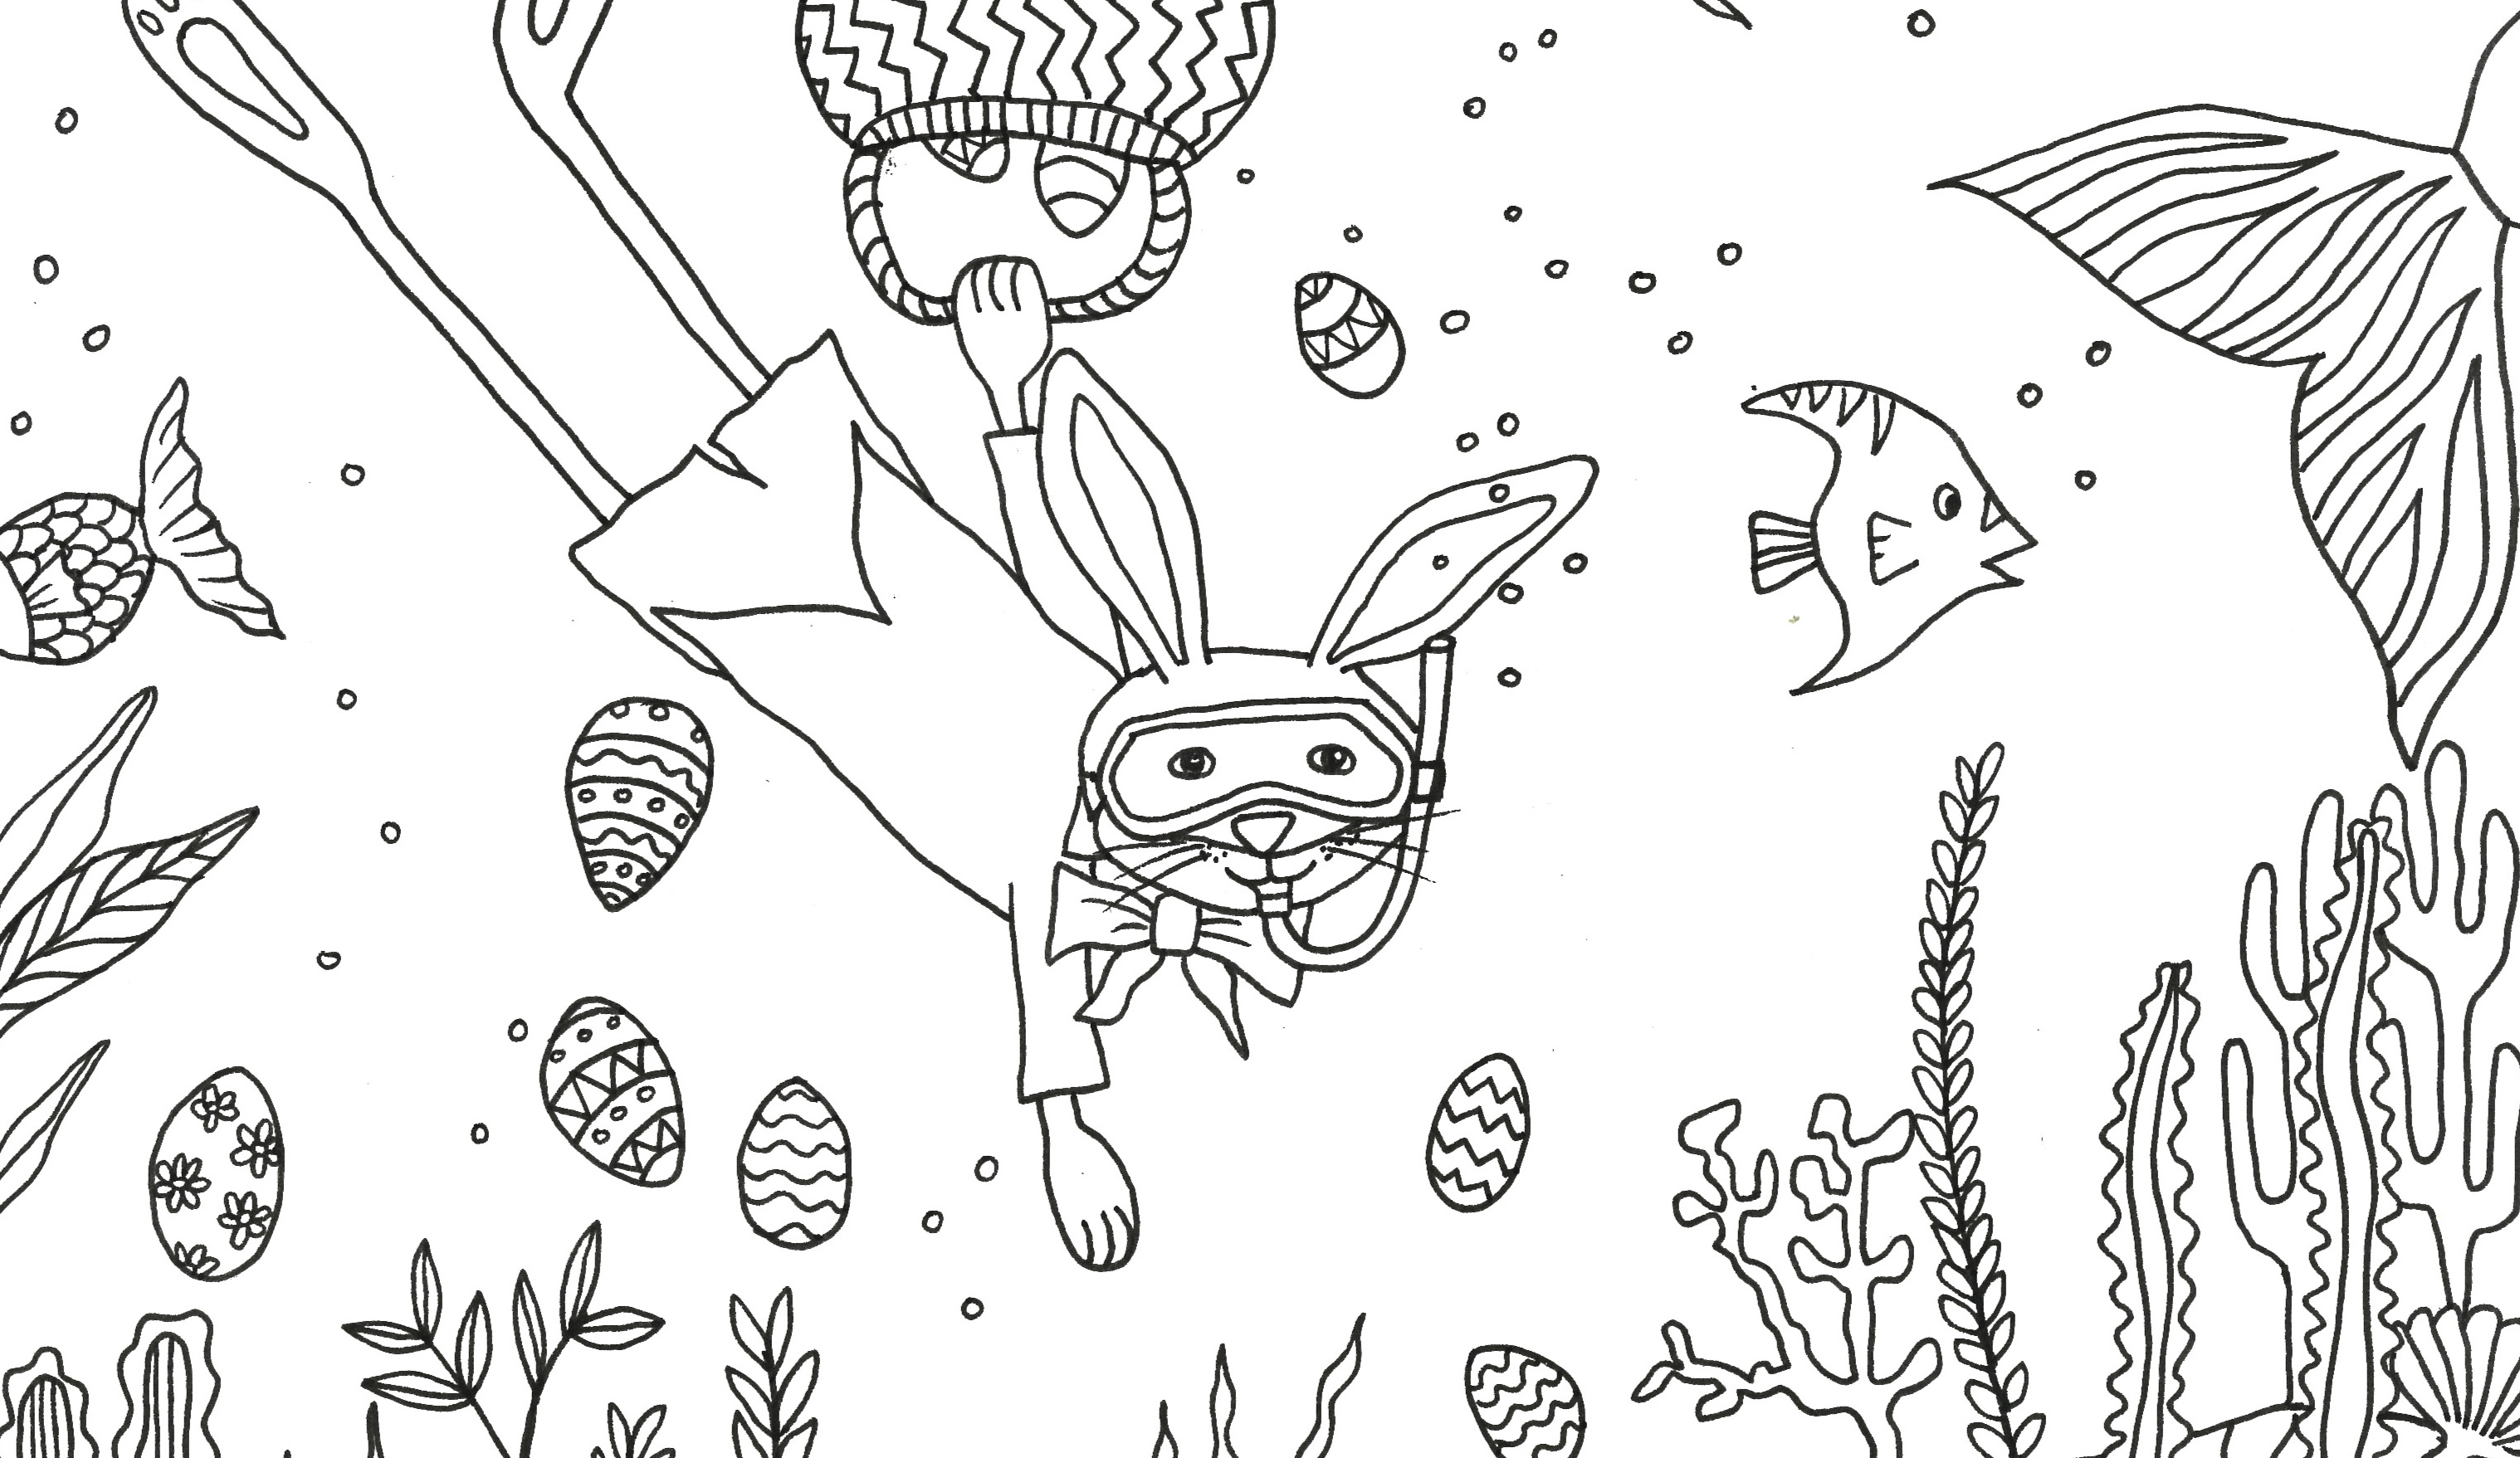 HAPPY EASTER COLOURING COMPETITION 2020!